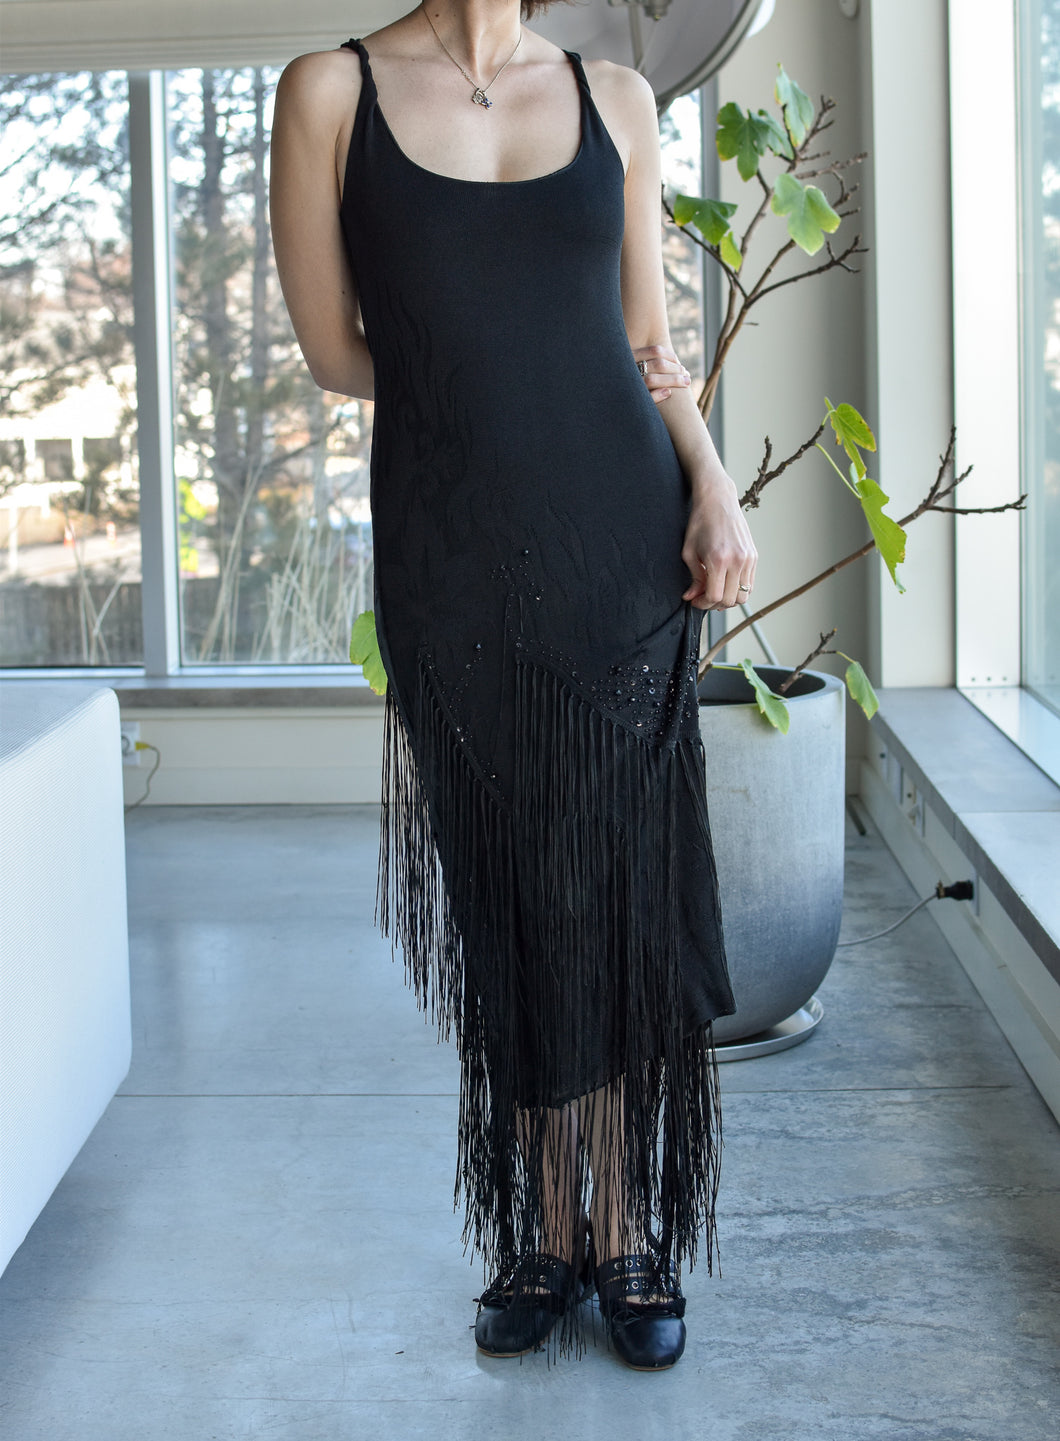 1990’s | Class by Roberto Cavalli | Black Maxi Dress with Beading and Fringe